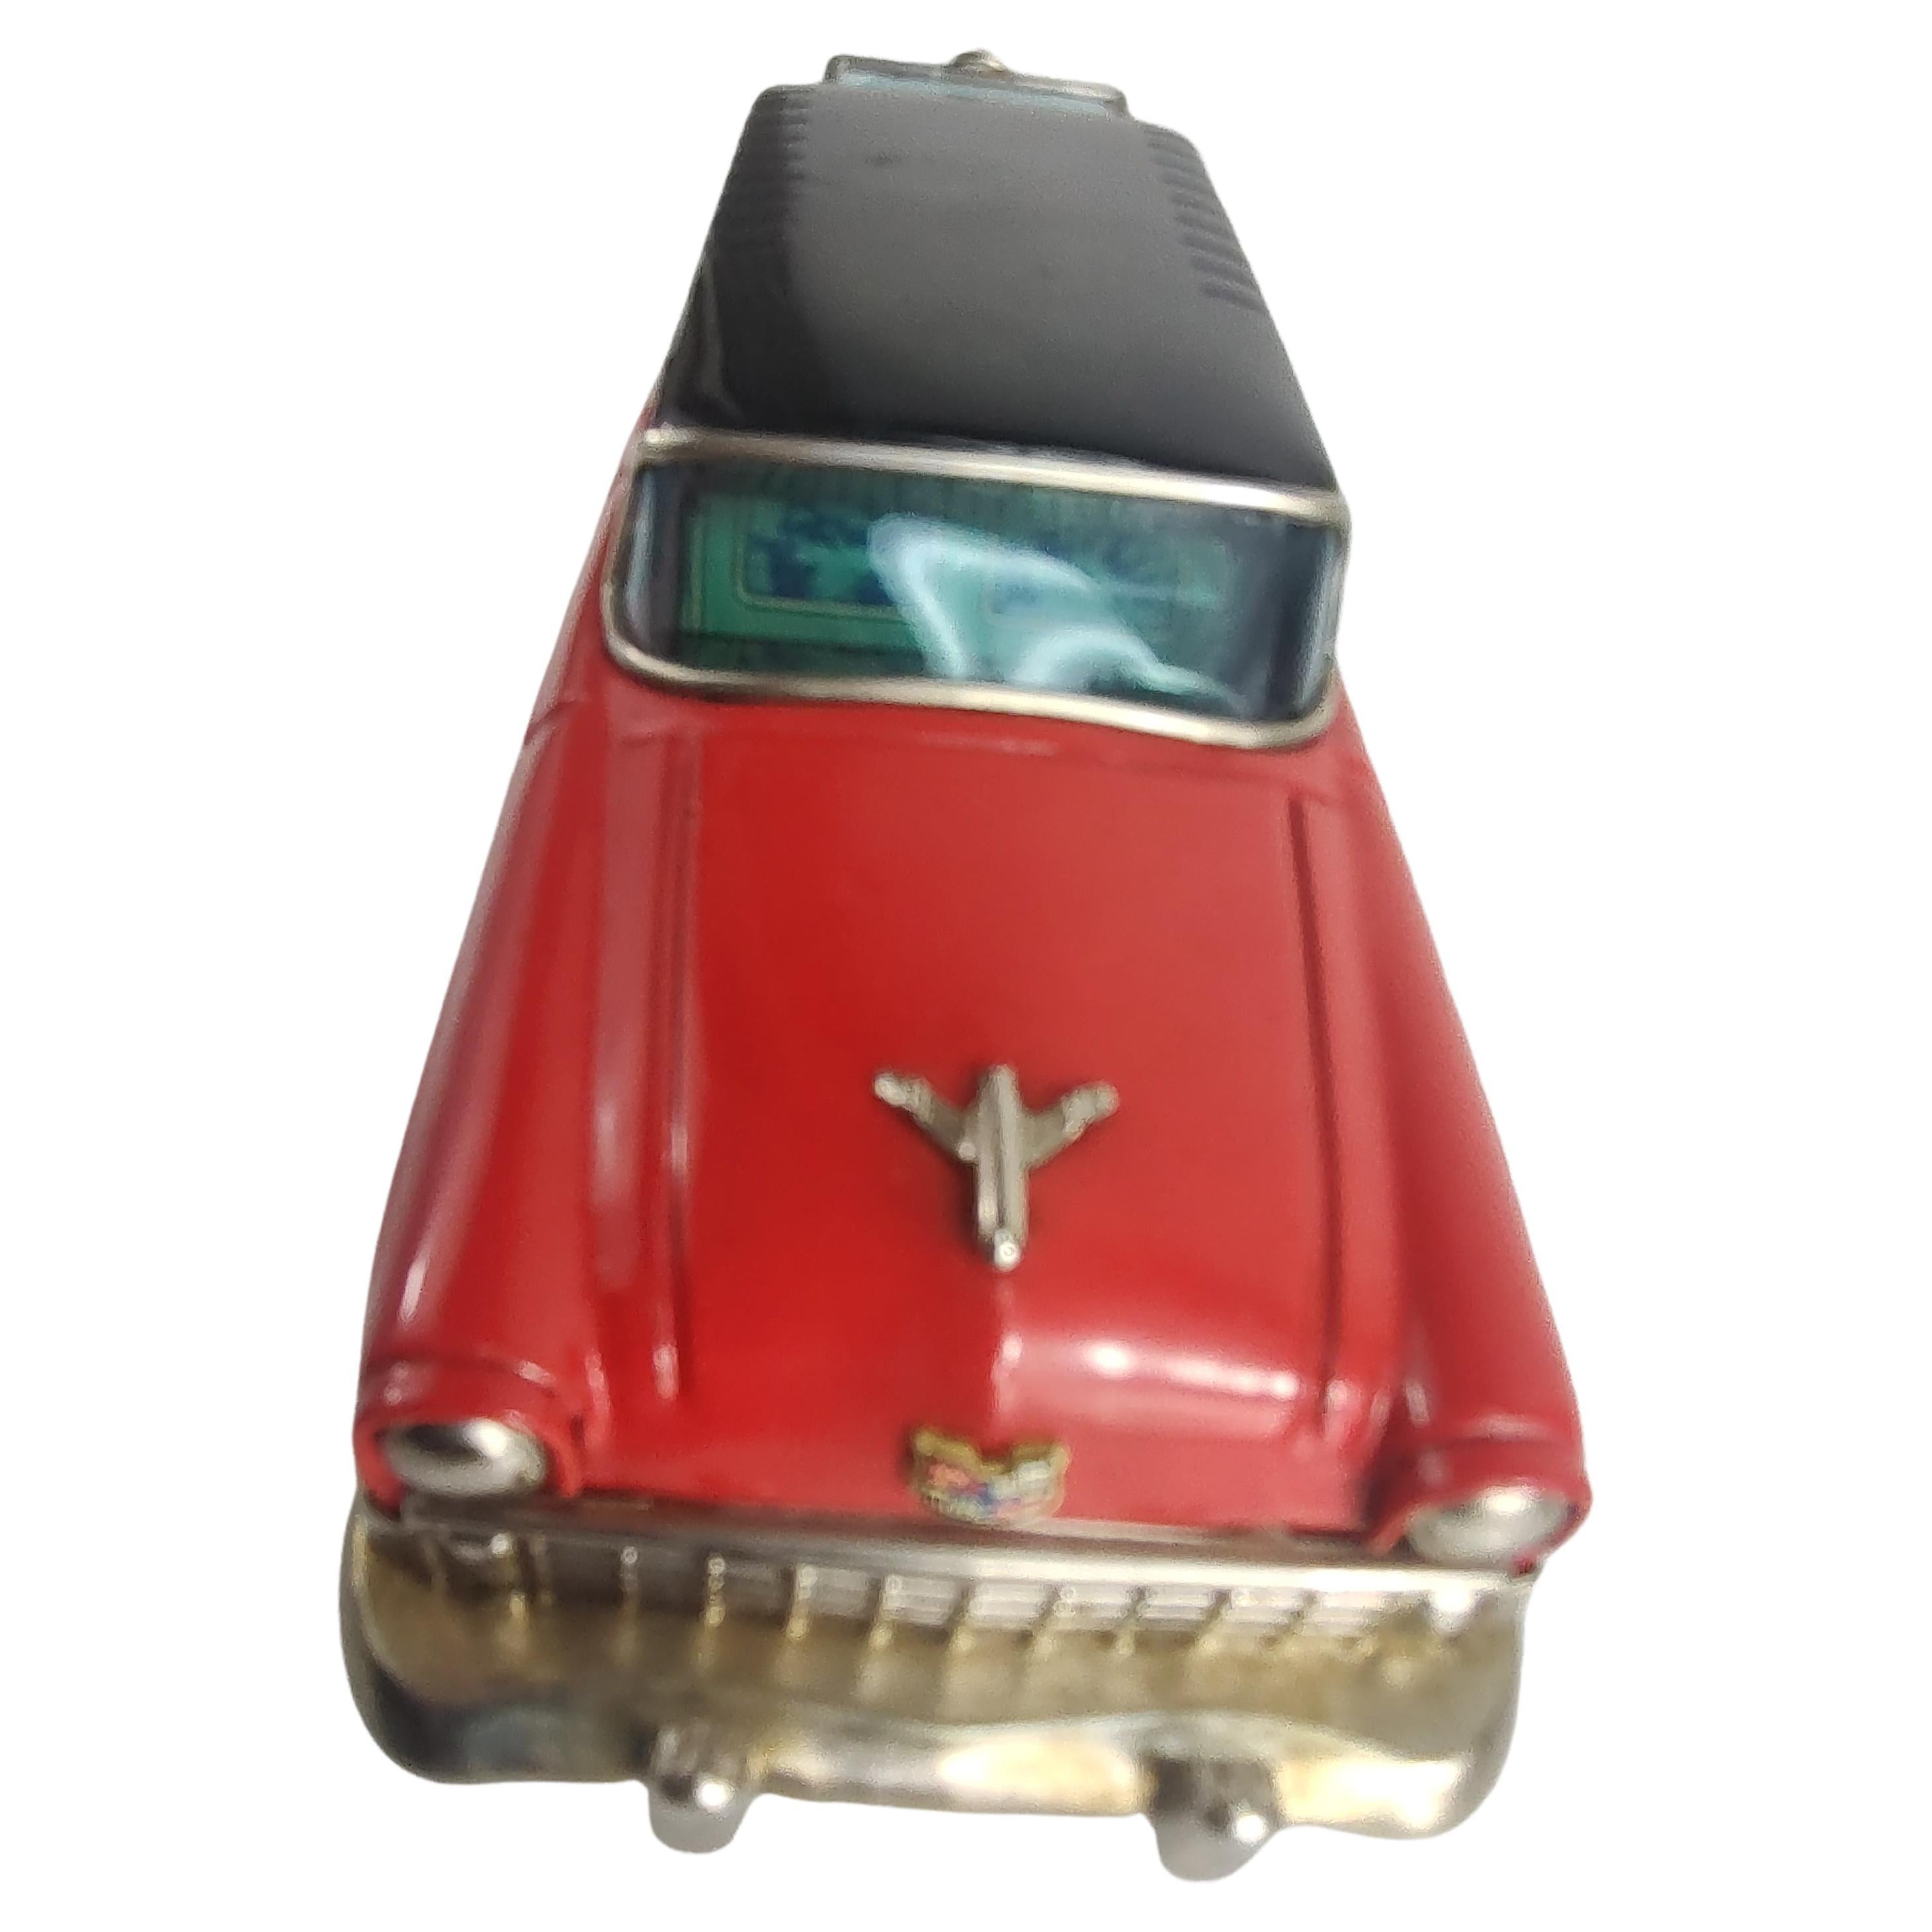 Mid-20th Century Mid Century Japanese Tin Litho Friction Toy Car Chevrolet Station Wagon C1956 For Sale